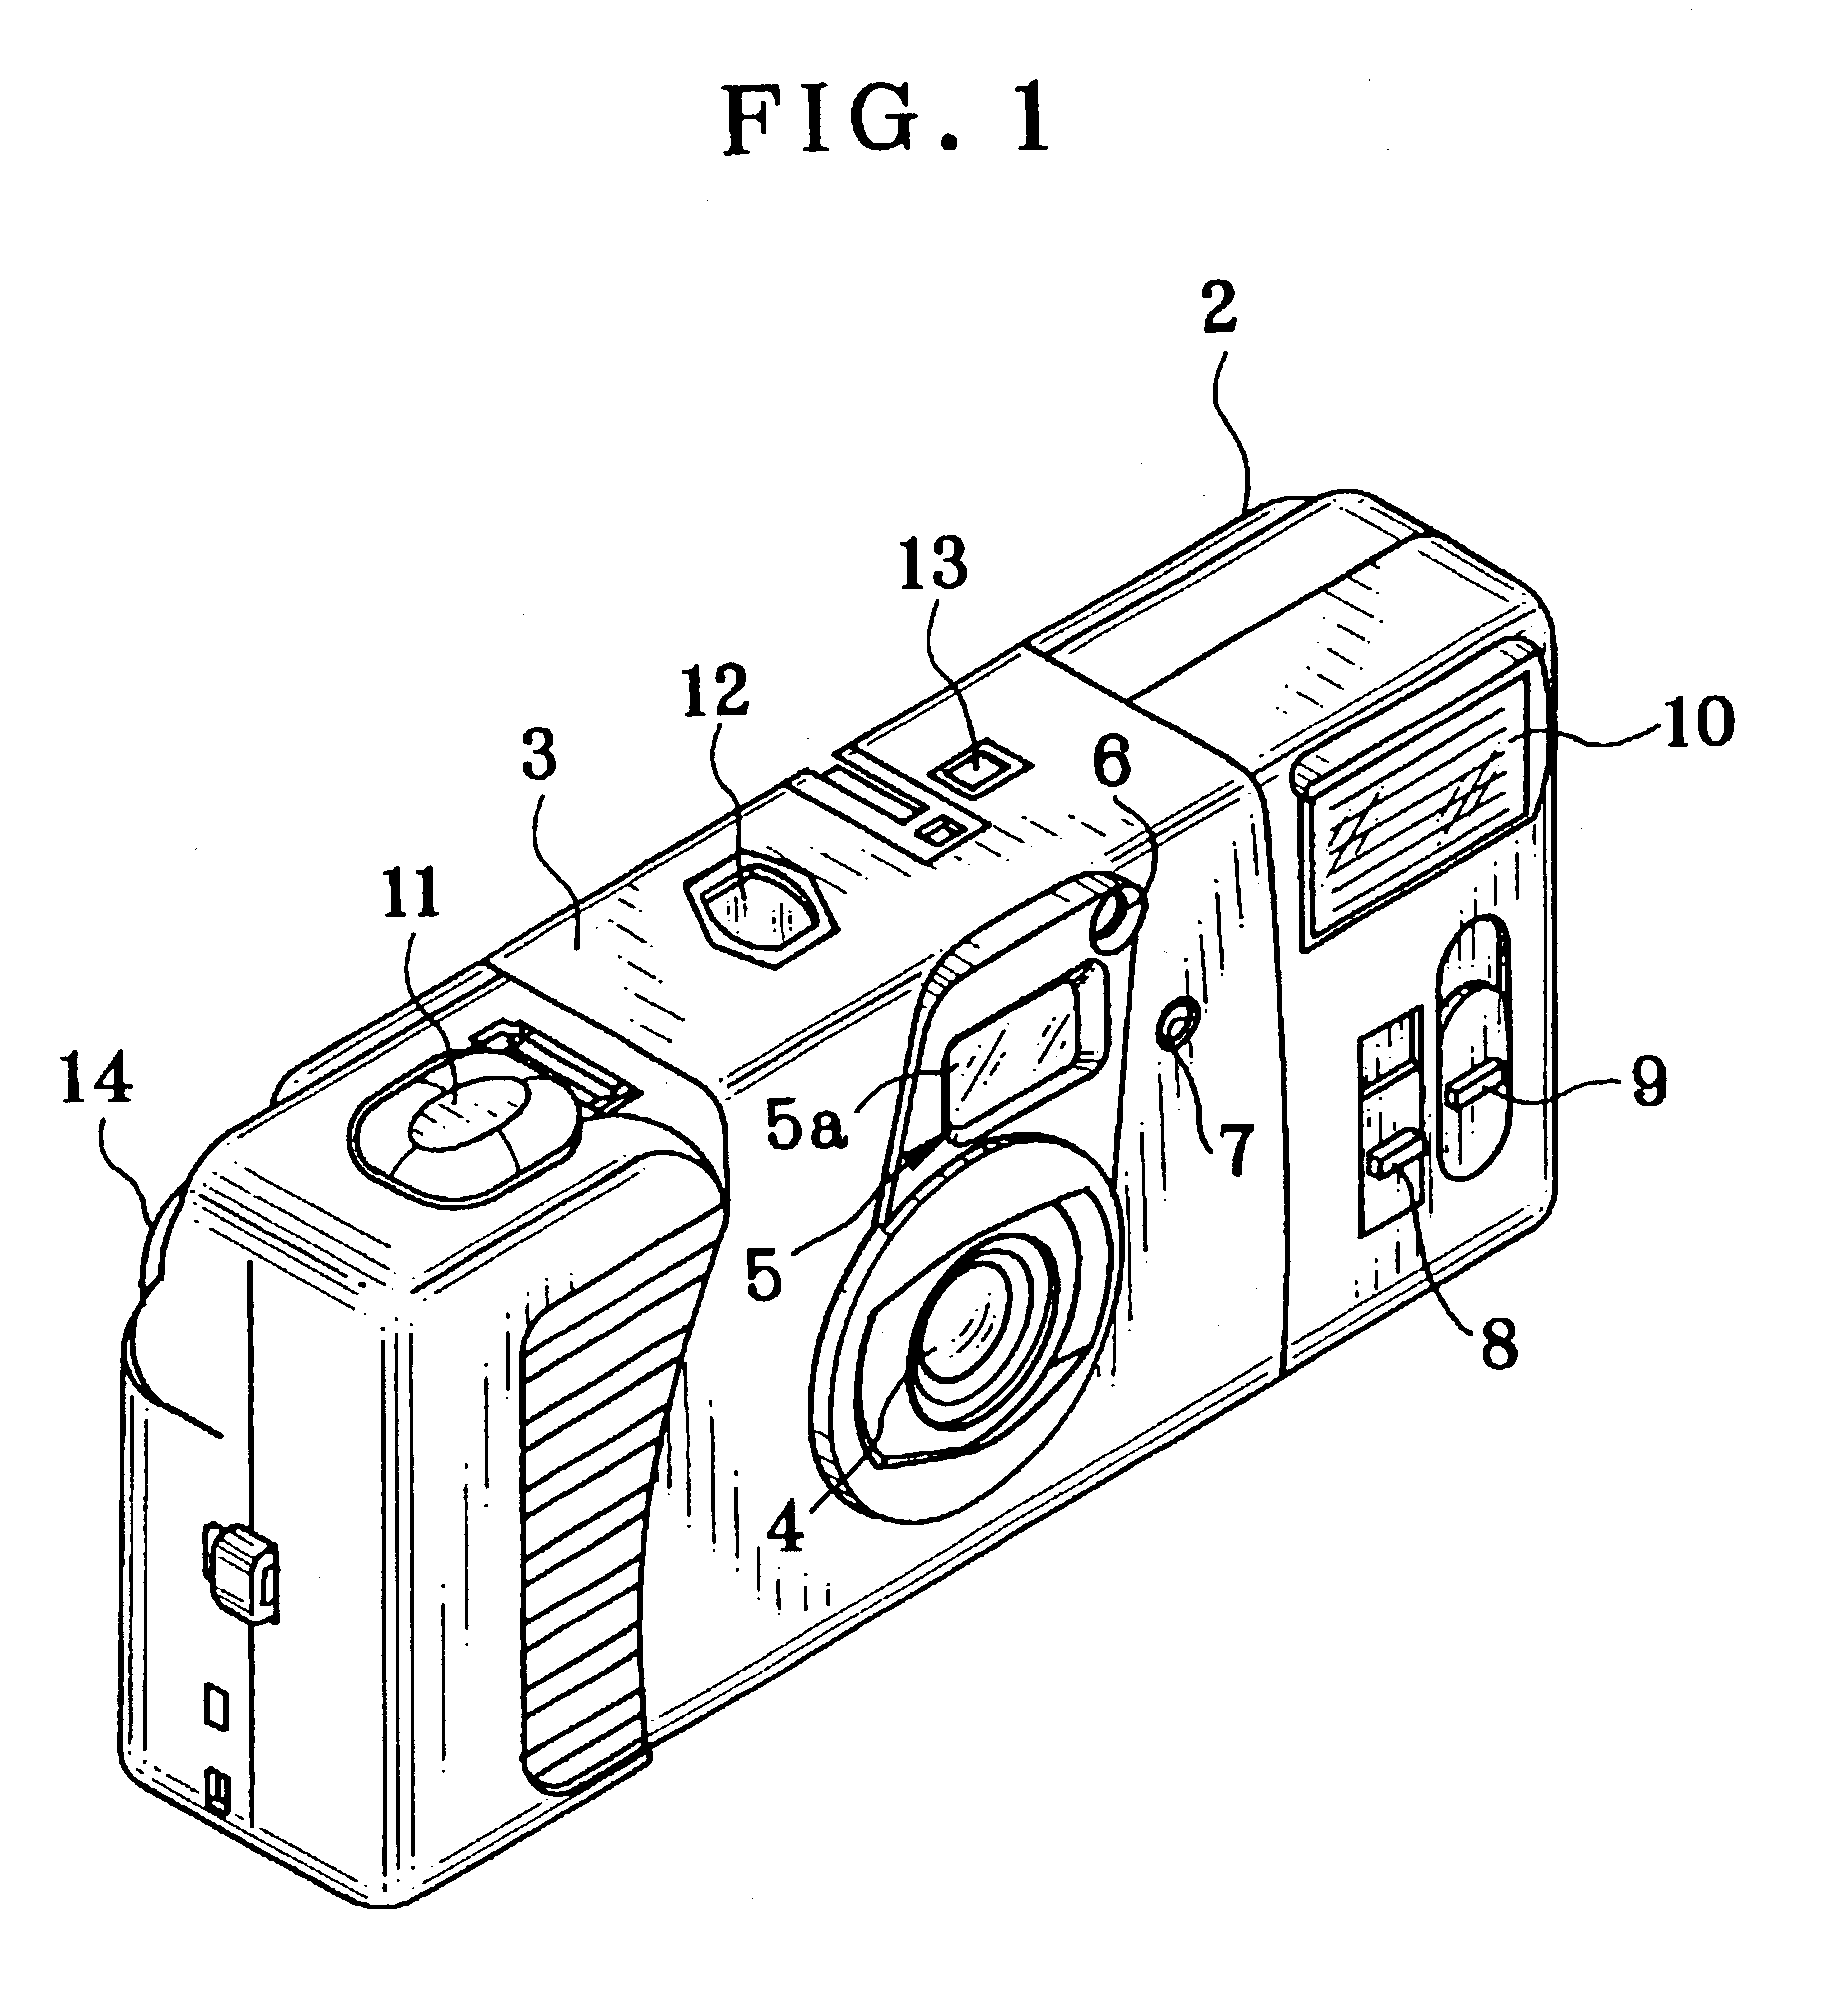 Lens-fitted photo film unit having aperture stop device